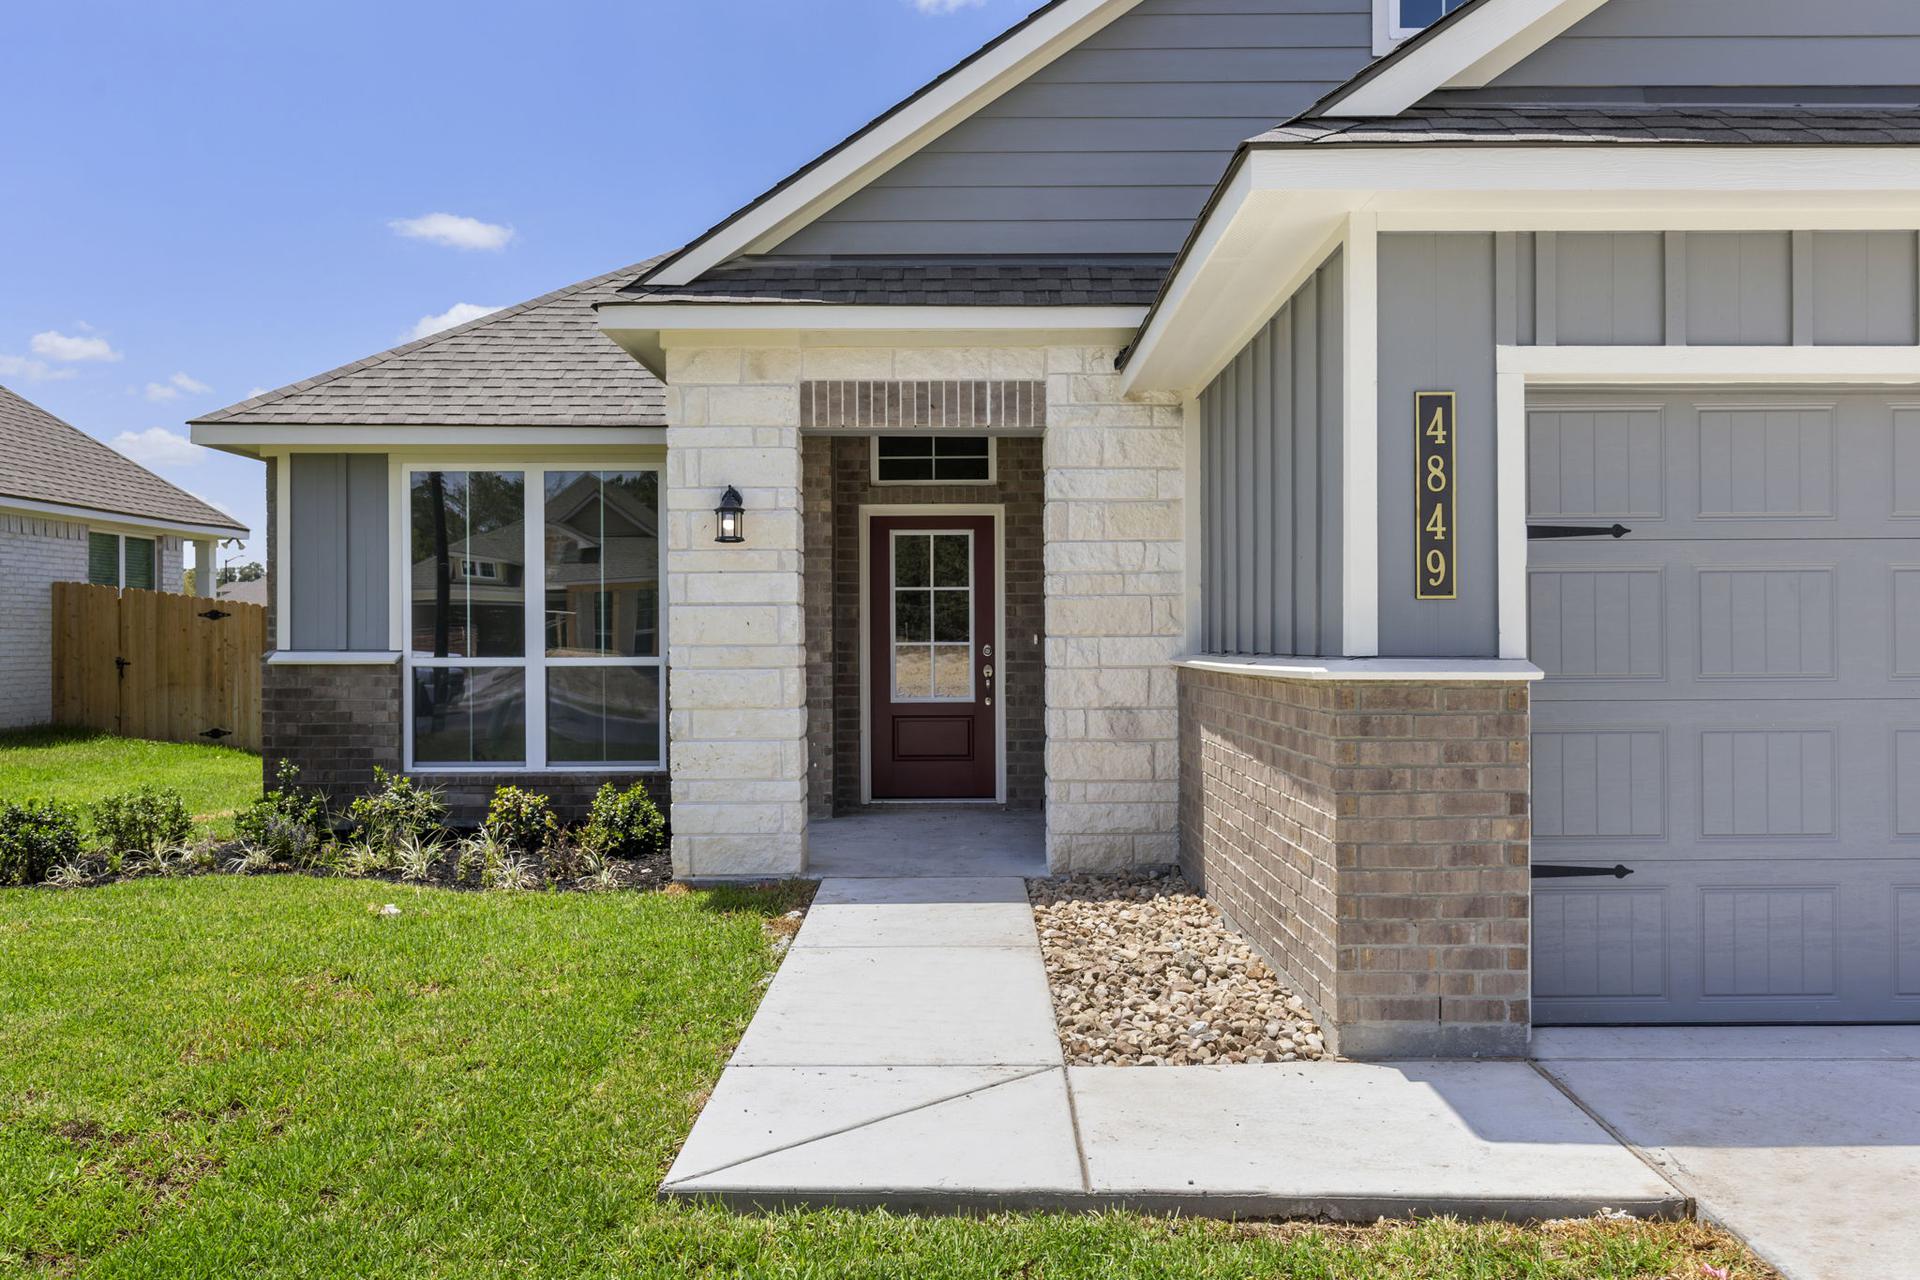 4br New Home in China Spring, TX